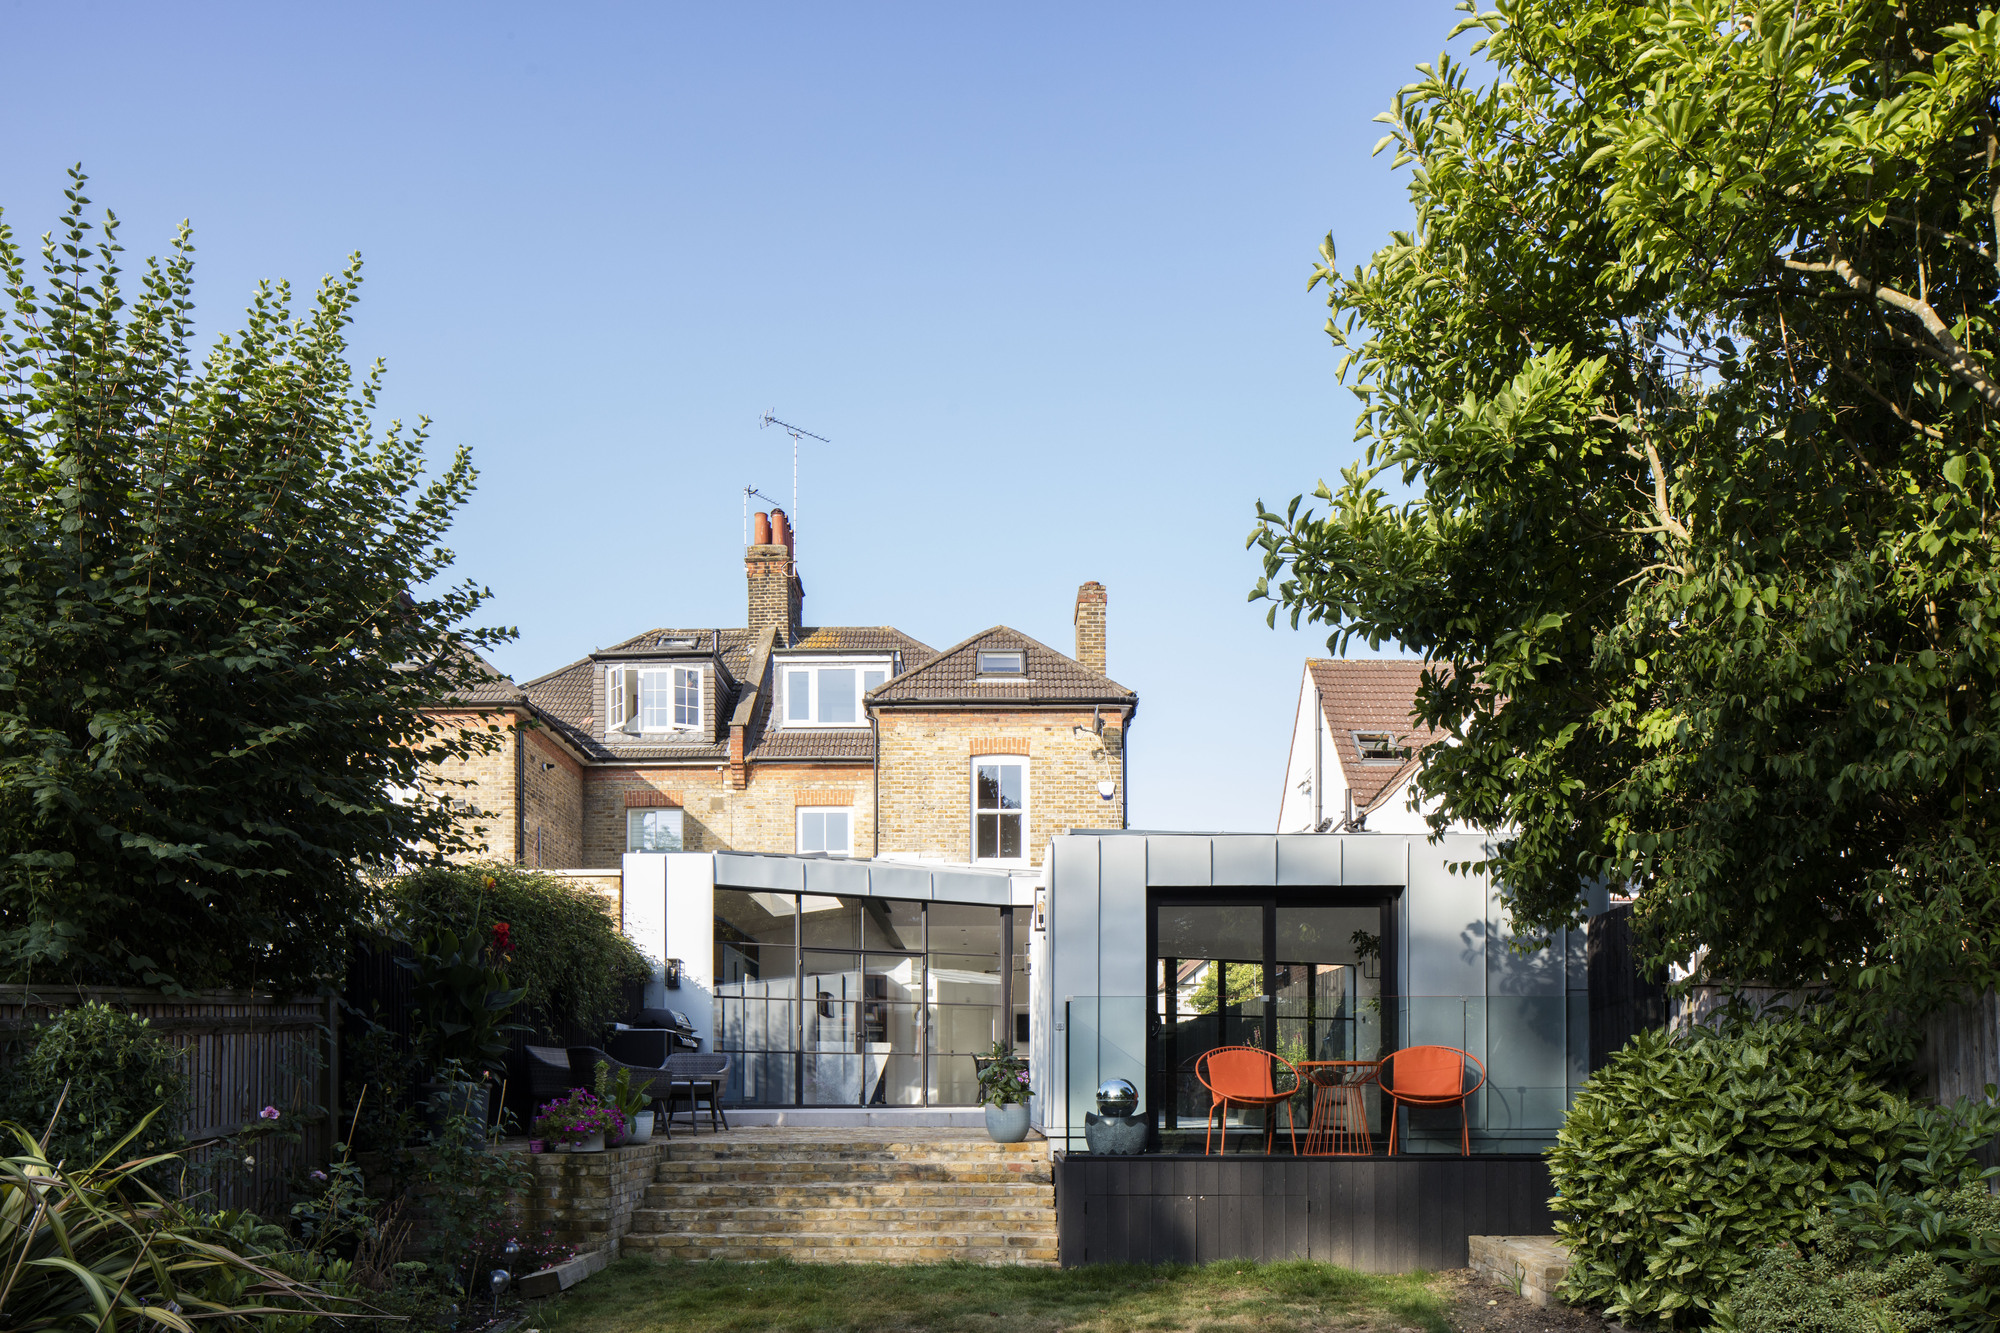 Ravensbourne-Avenue-House-renovation-in-London-designed-by-Minifie-Architects-54487